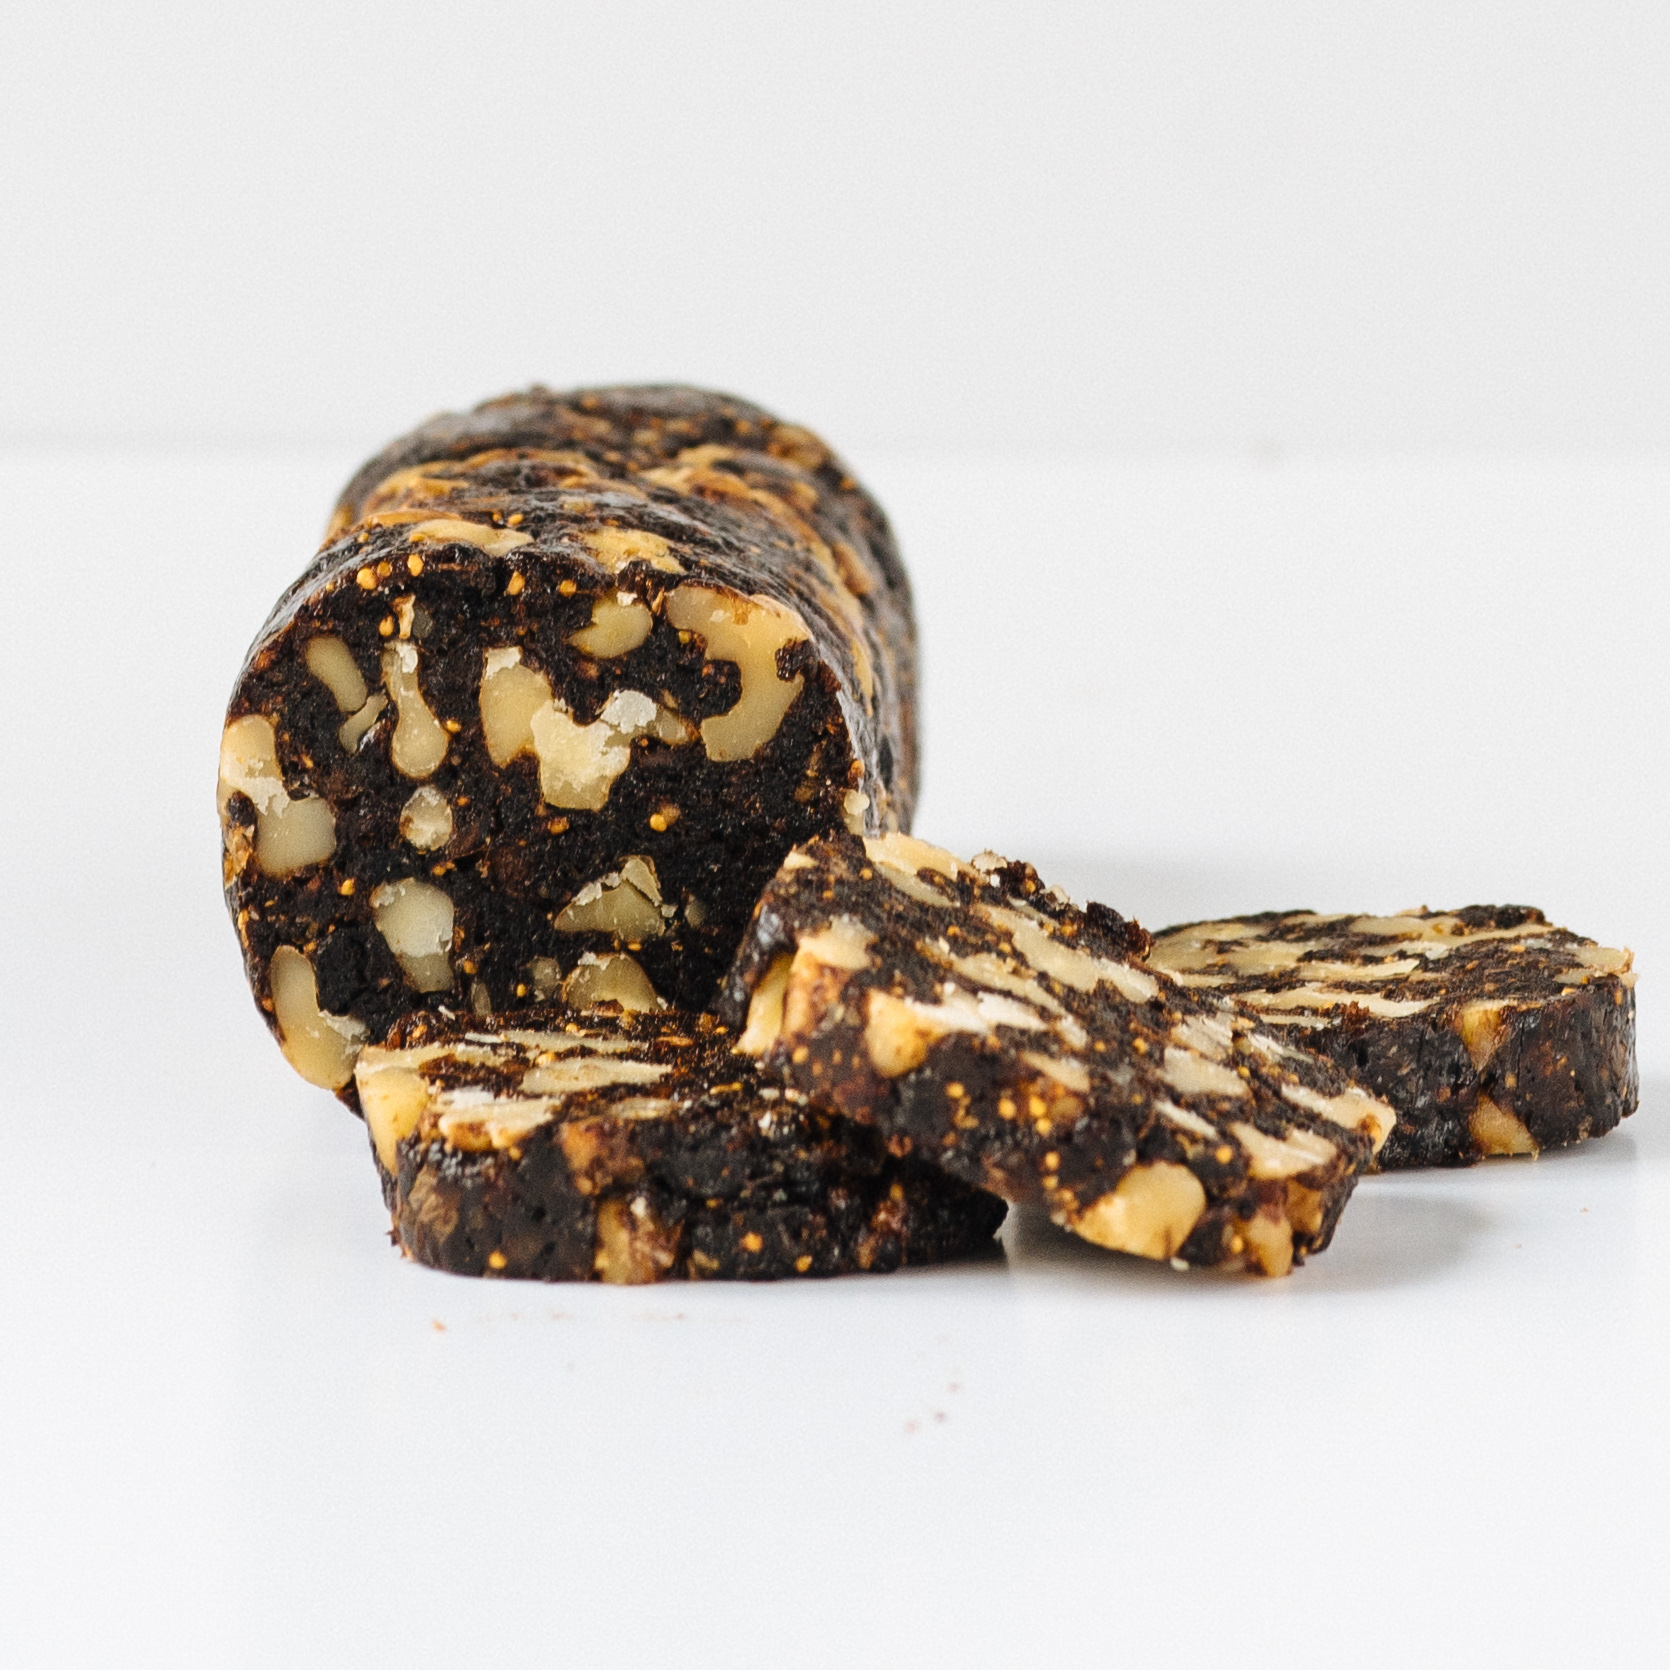 grain-free dried fruit and nut snacks made with figs and Sunsweet prune